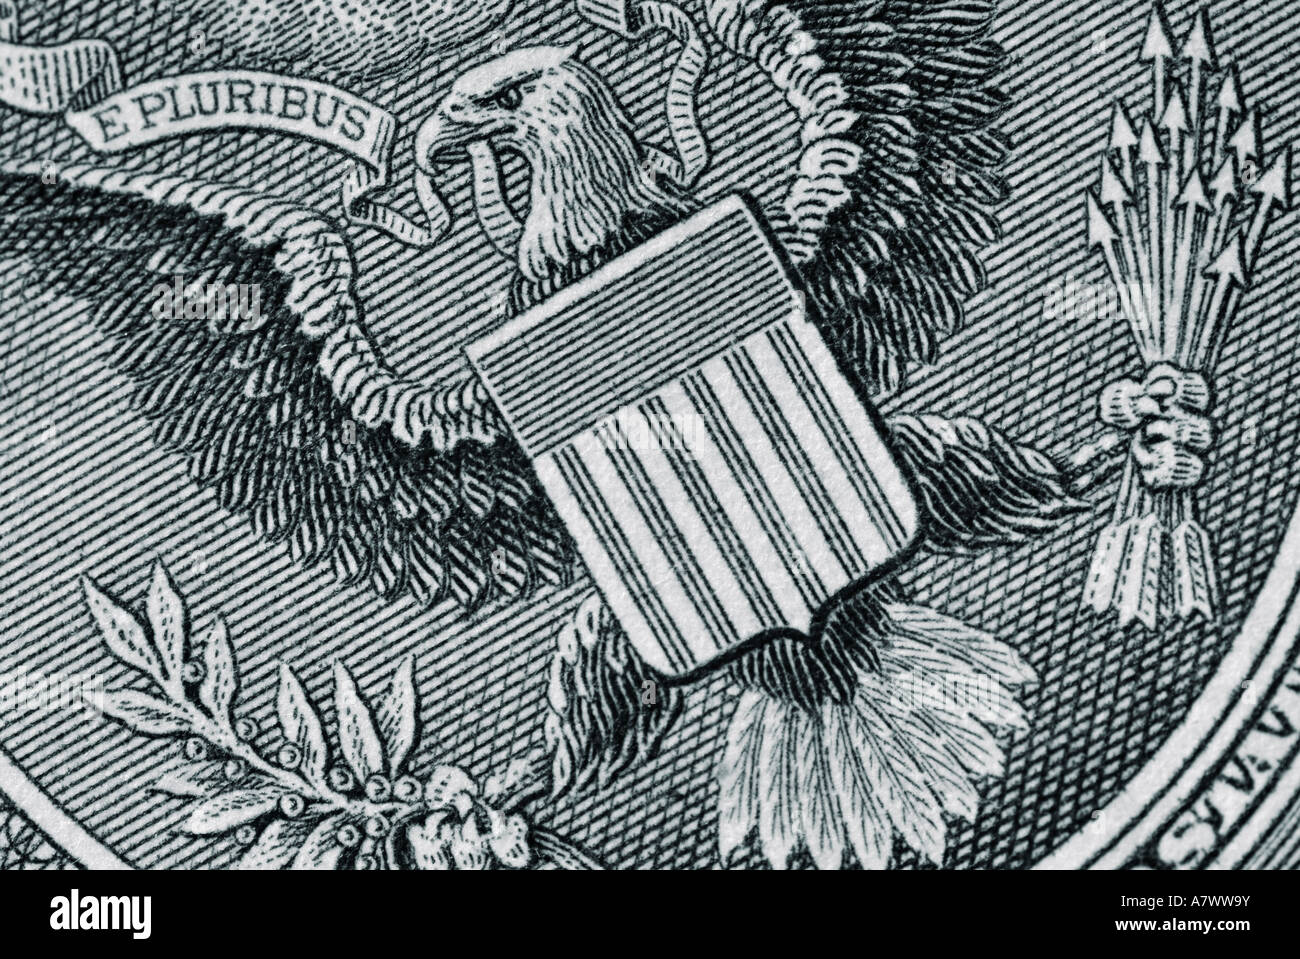 Dollar Bill Close Up Showing the Great Seal The National Coat of Arms of the United States of America Stock Photo